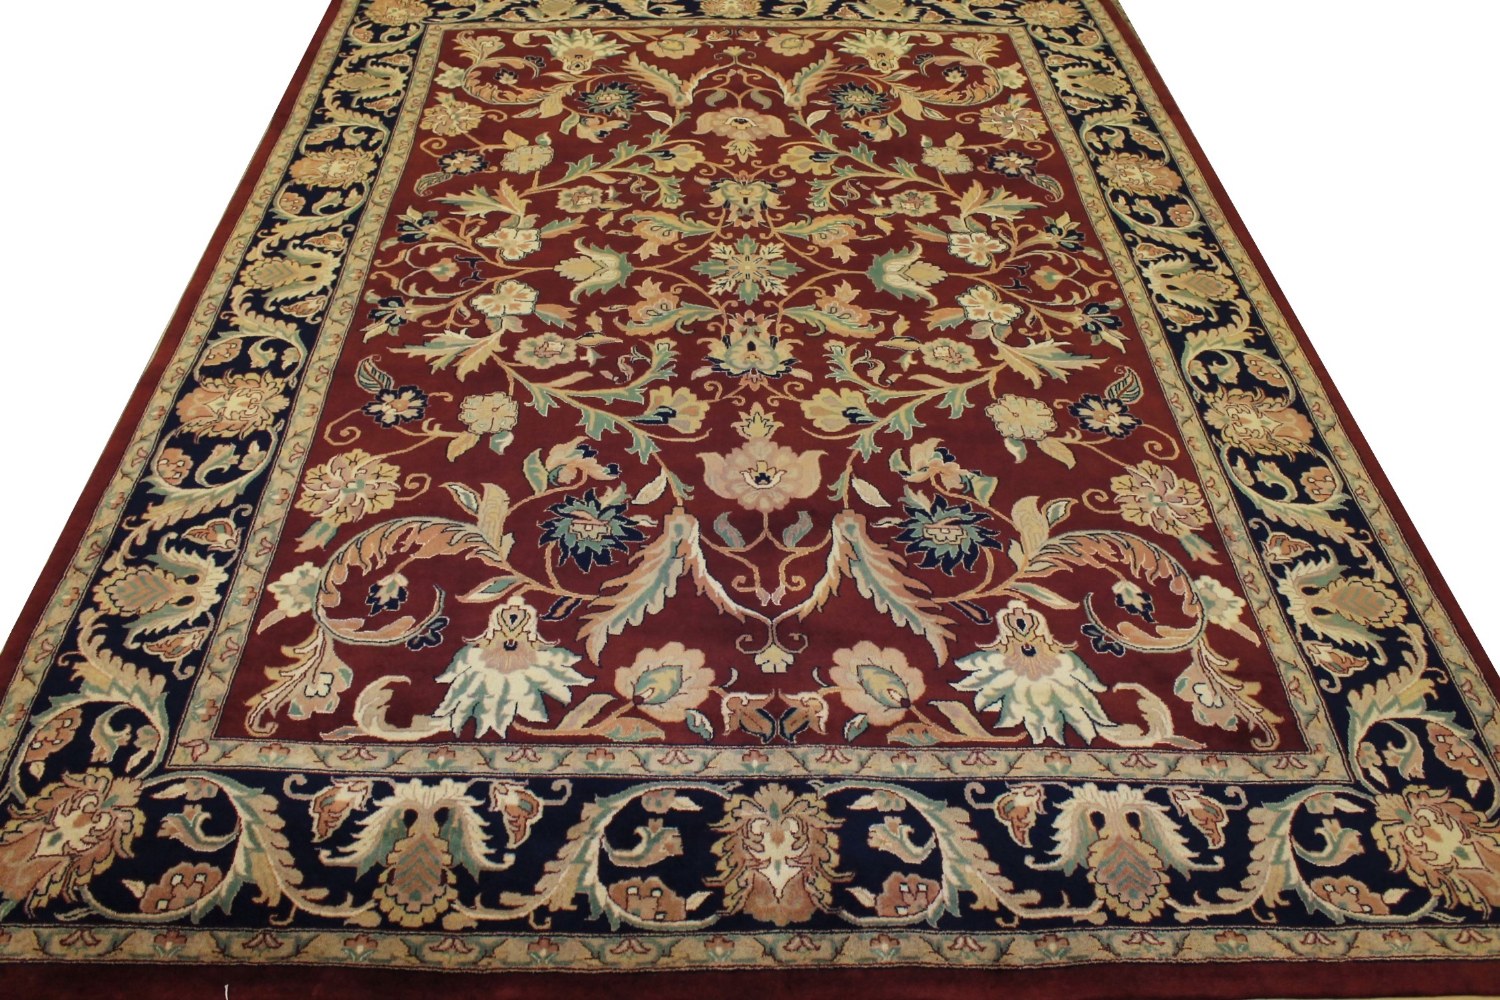 9x12 Jaipur Hand Knotted Wool Area Rug - MR0110